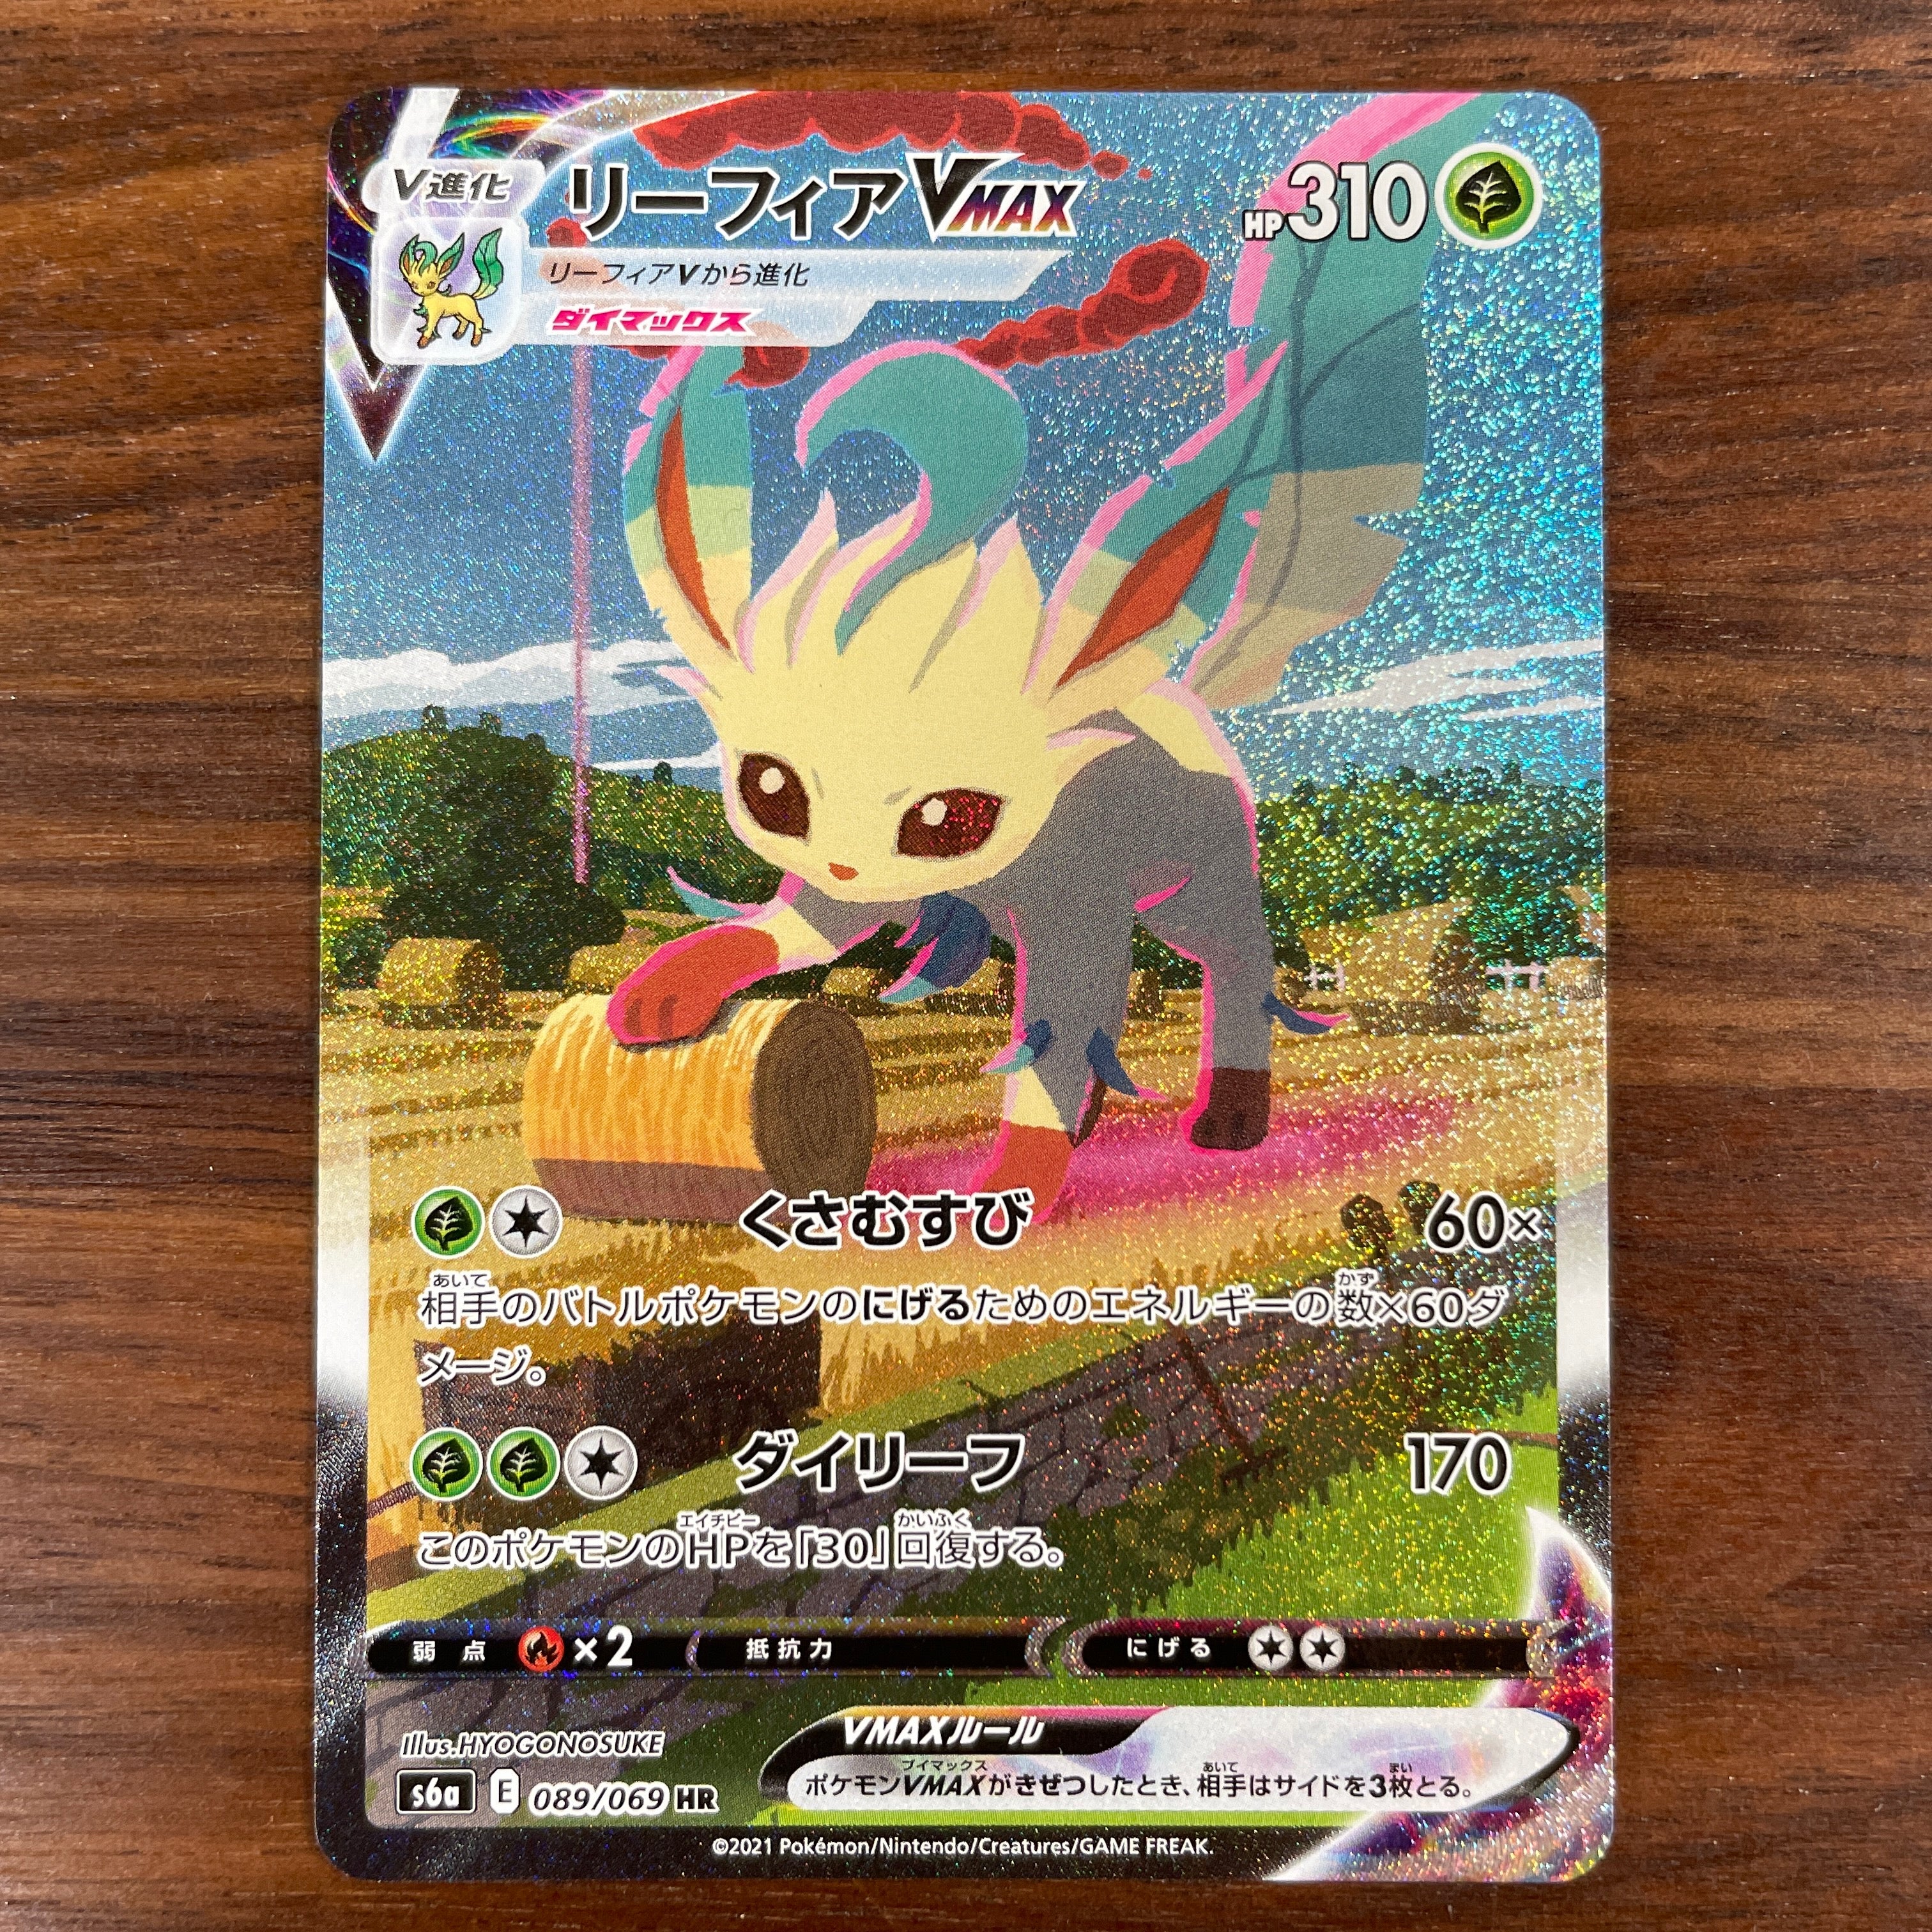 POKÉMON CARD GAME Sword & Shield Expansion pack ｢Eevee Heroes｣  POKÉMON CARD GAME s6a 089/069 Hyper Rare card  Leafeon VMAX